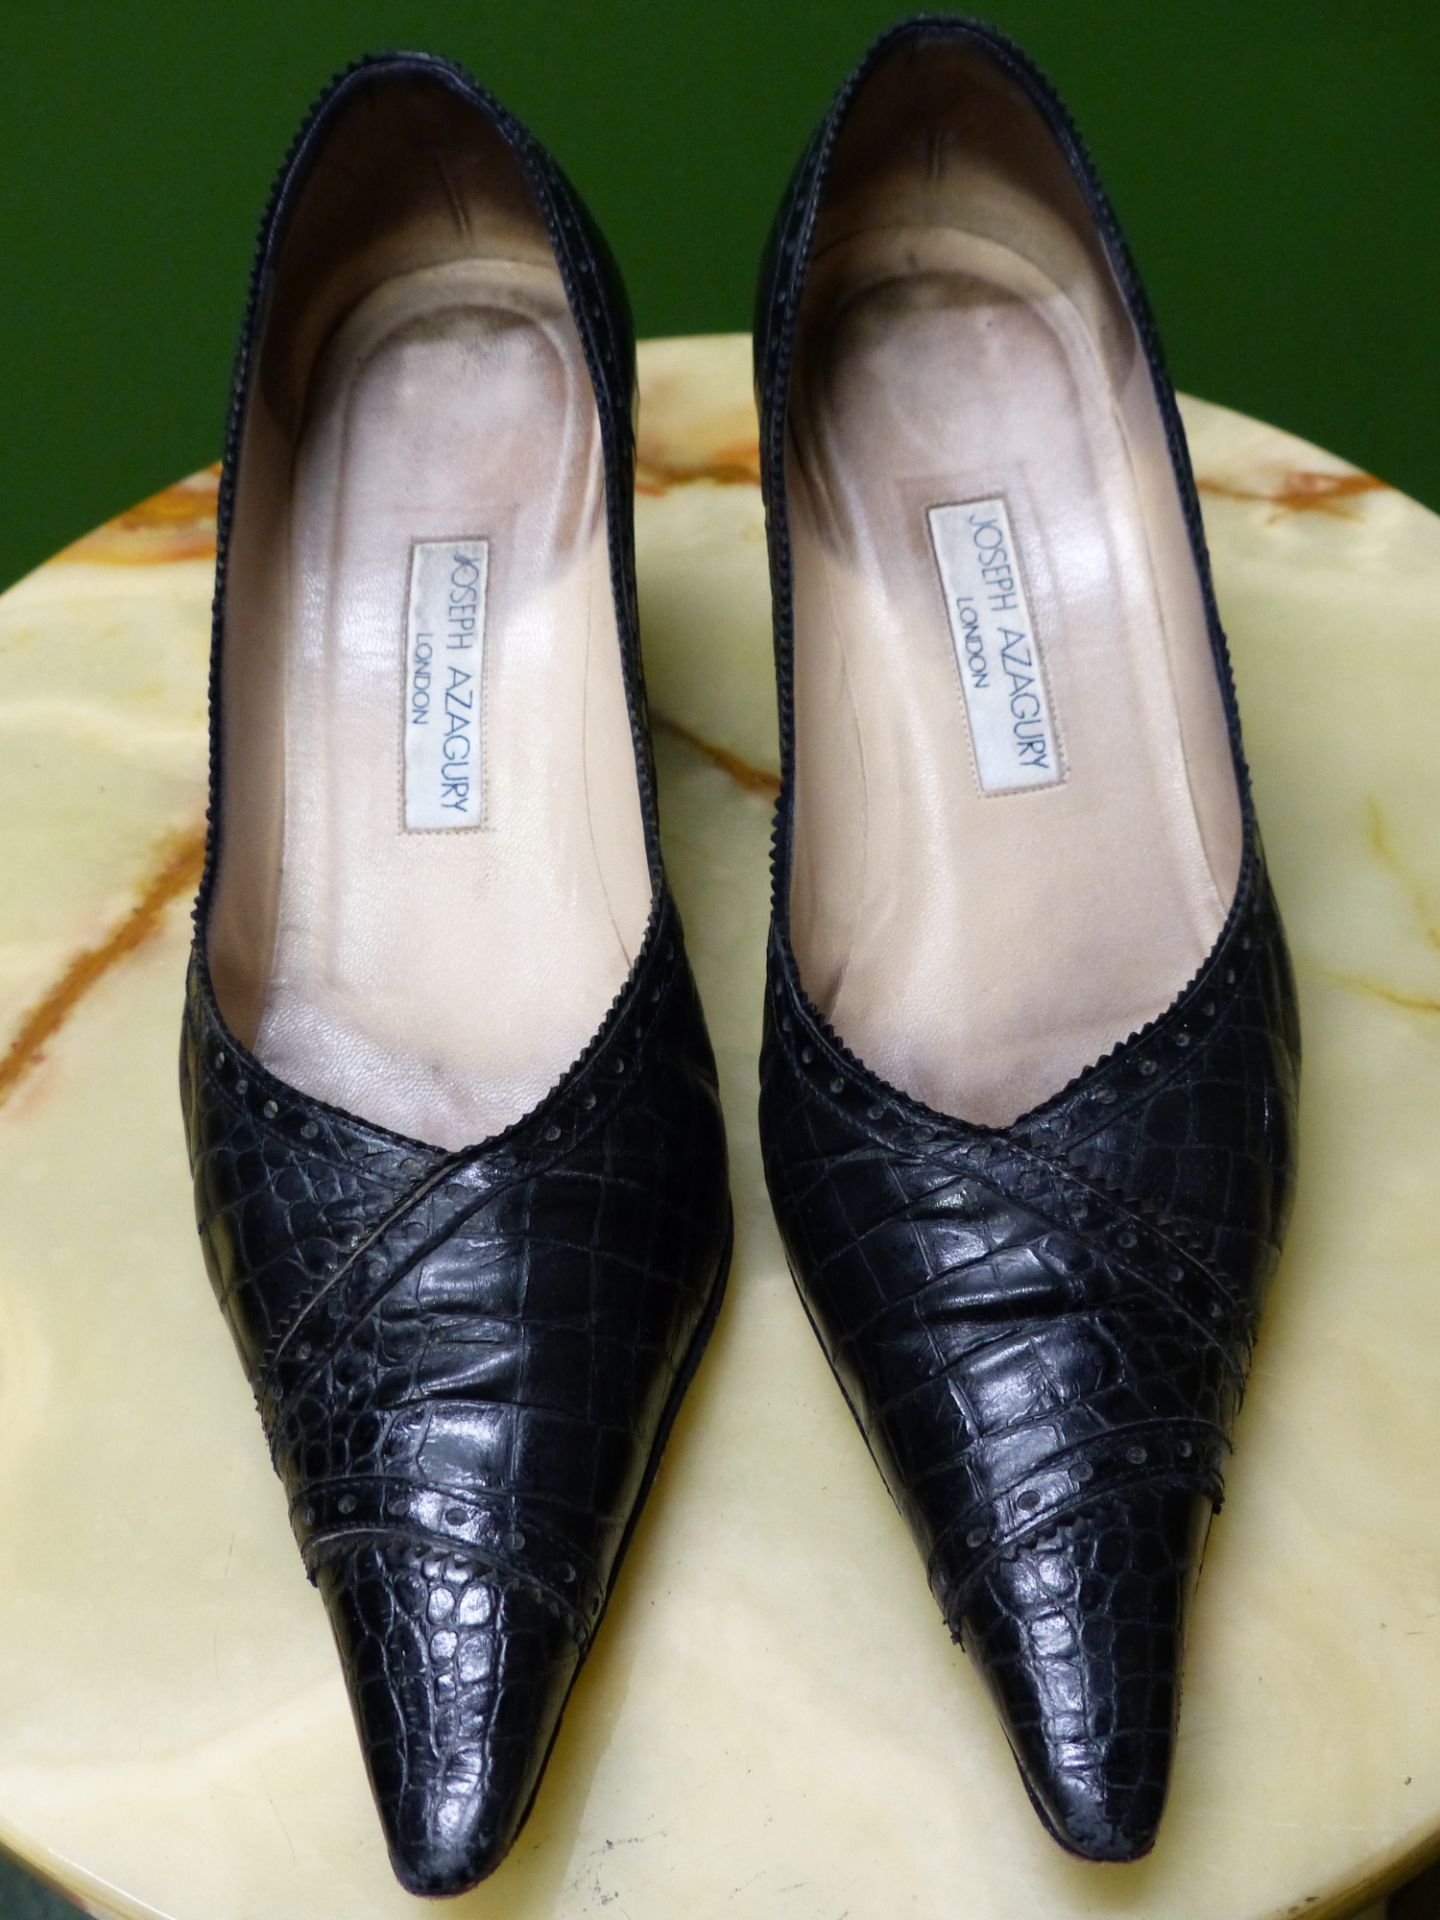 SHOES. THREE PAIR OF JOSEPH AZAGURY LONDON. SUEDE BROWN FLATS EUR SIZE 39. BLACK LEATHER AND SUEDE - Image 5 of 15